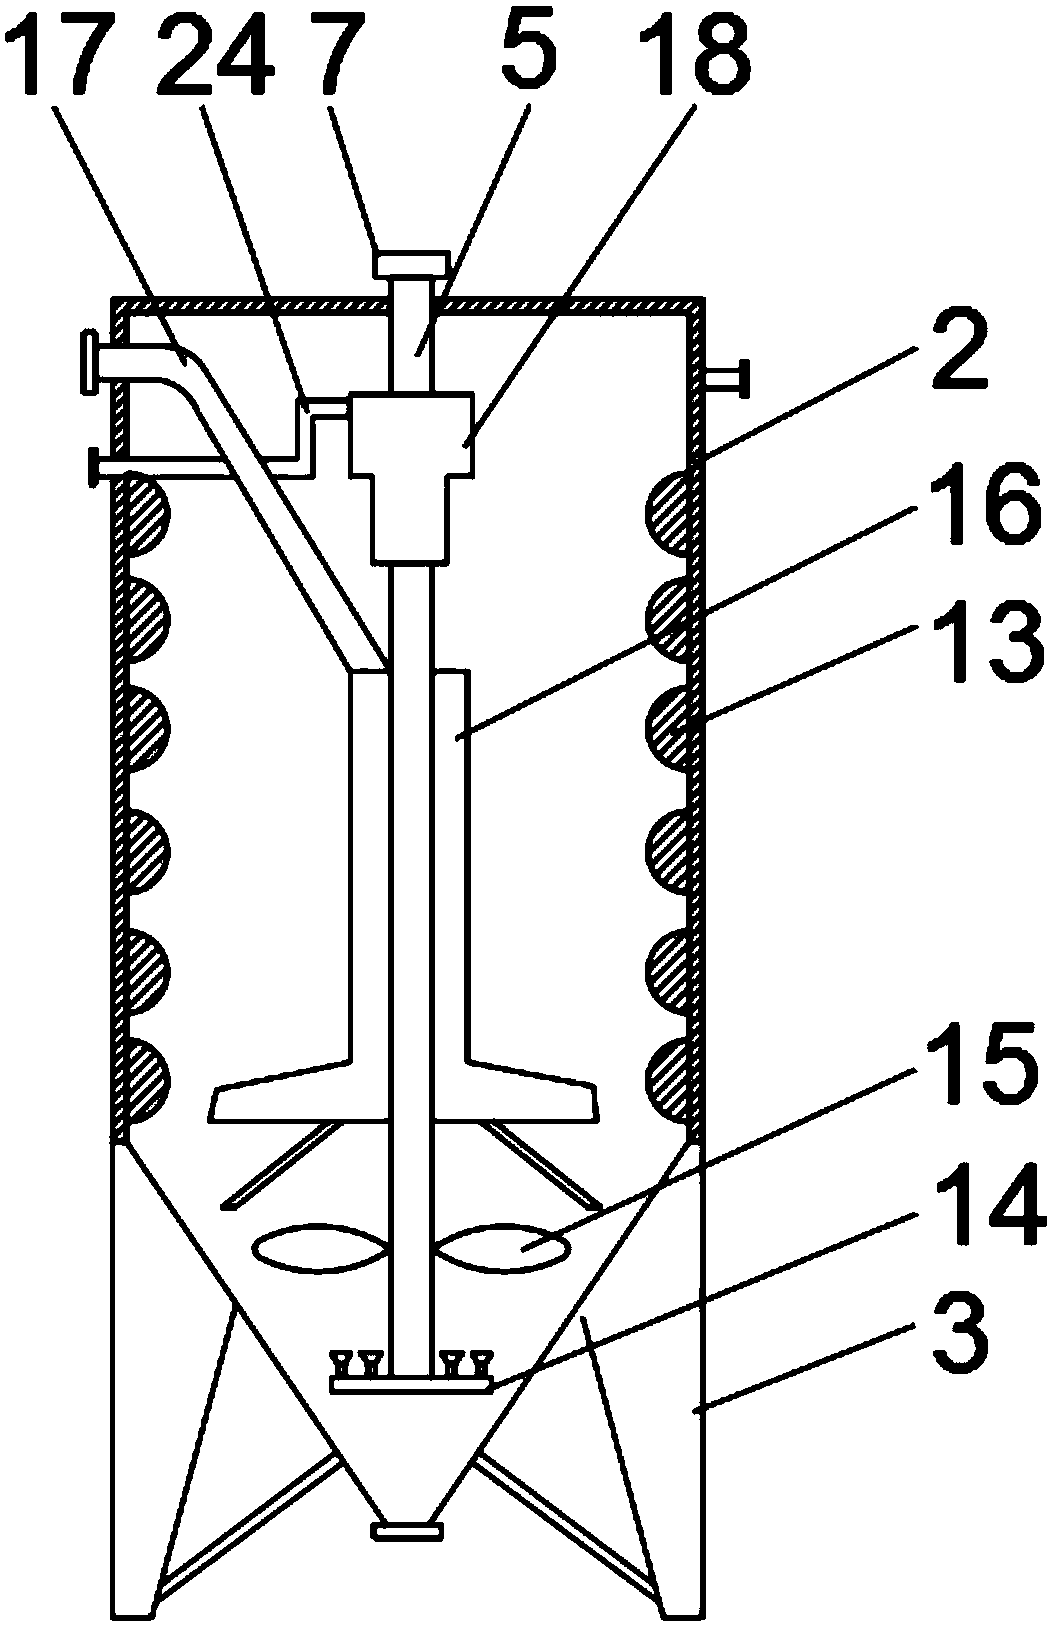 Sand washing device for filtration system